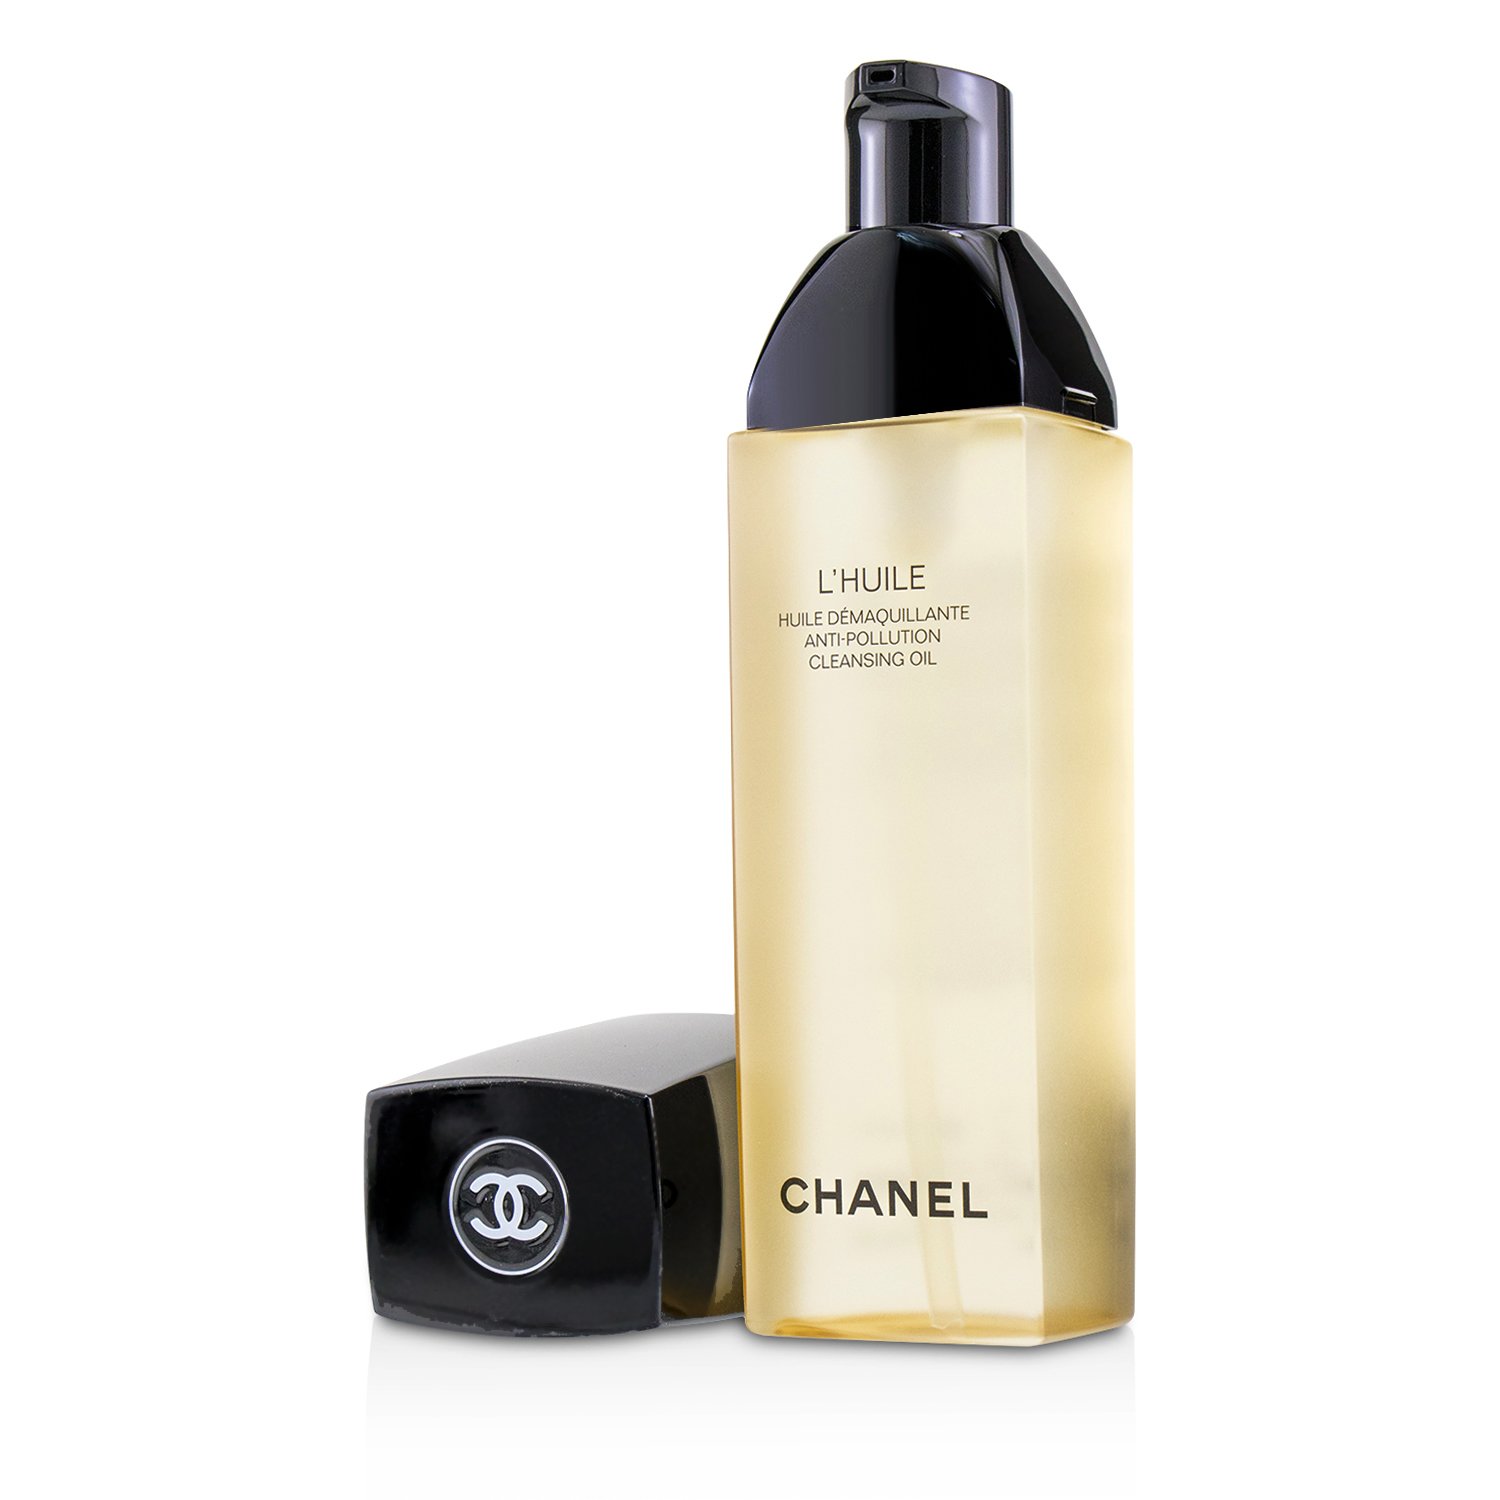 CHANEL (L'HUILE) Anti-Pollution Cleansing Oil